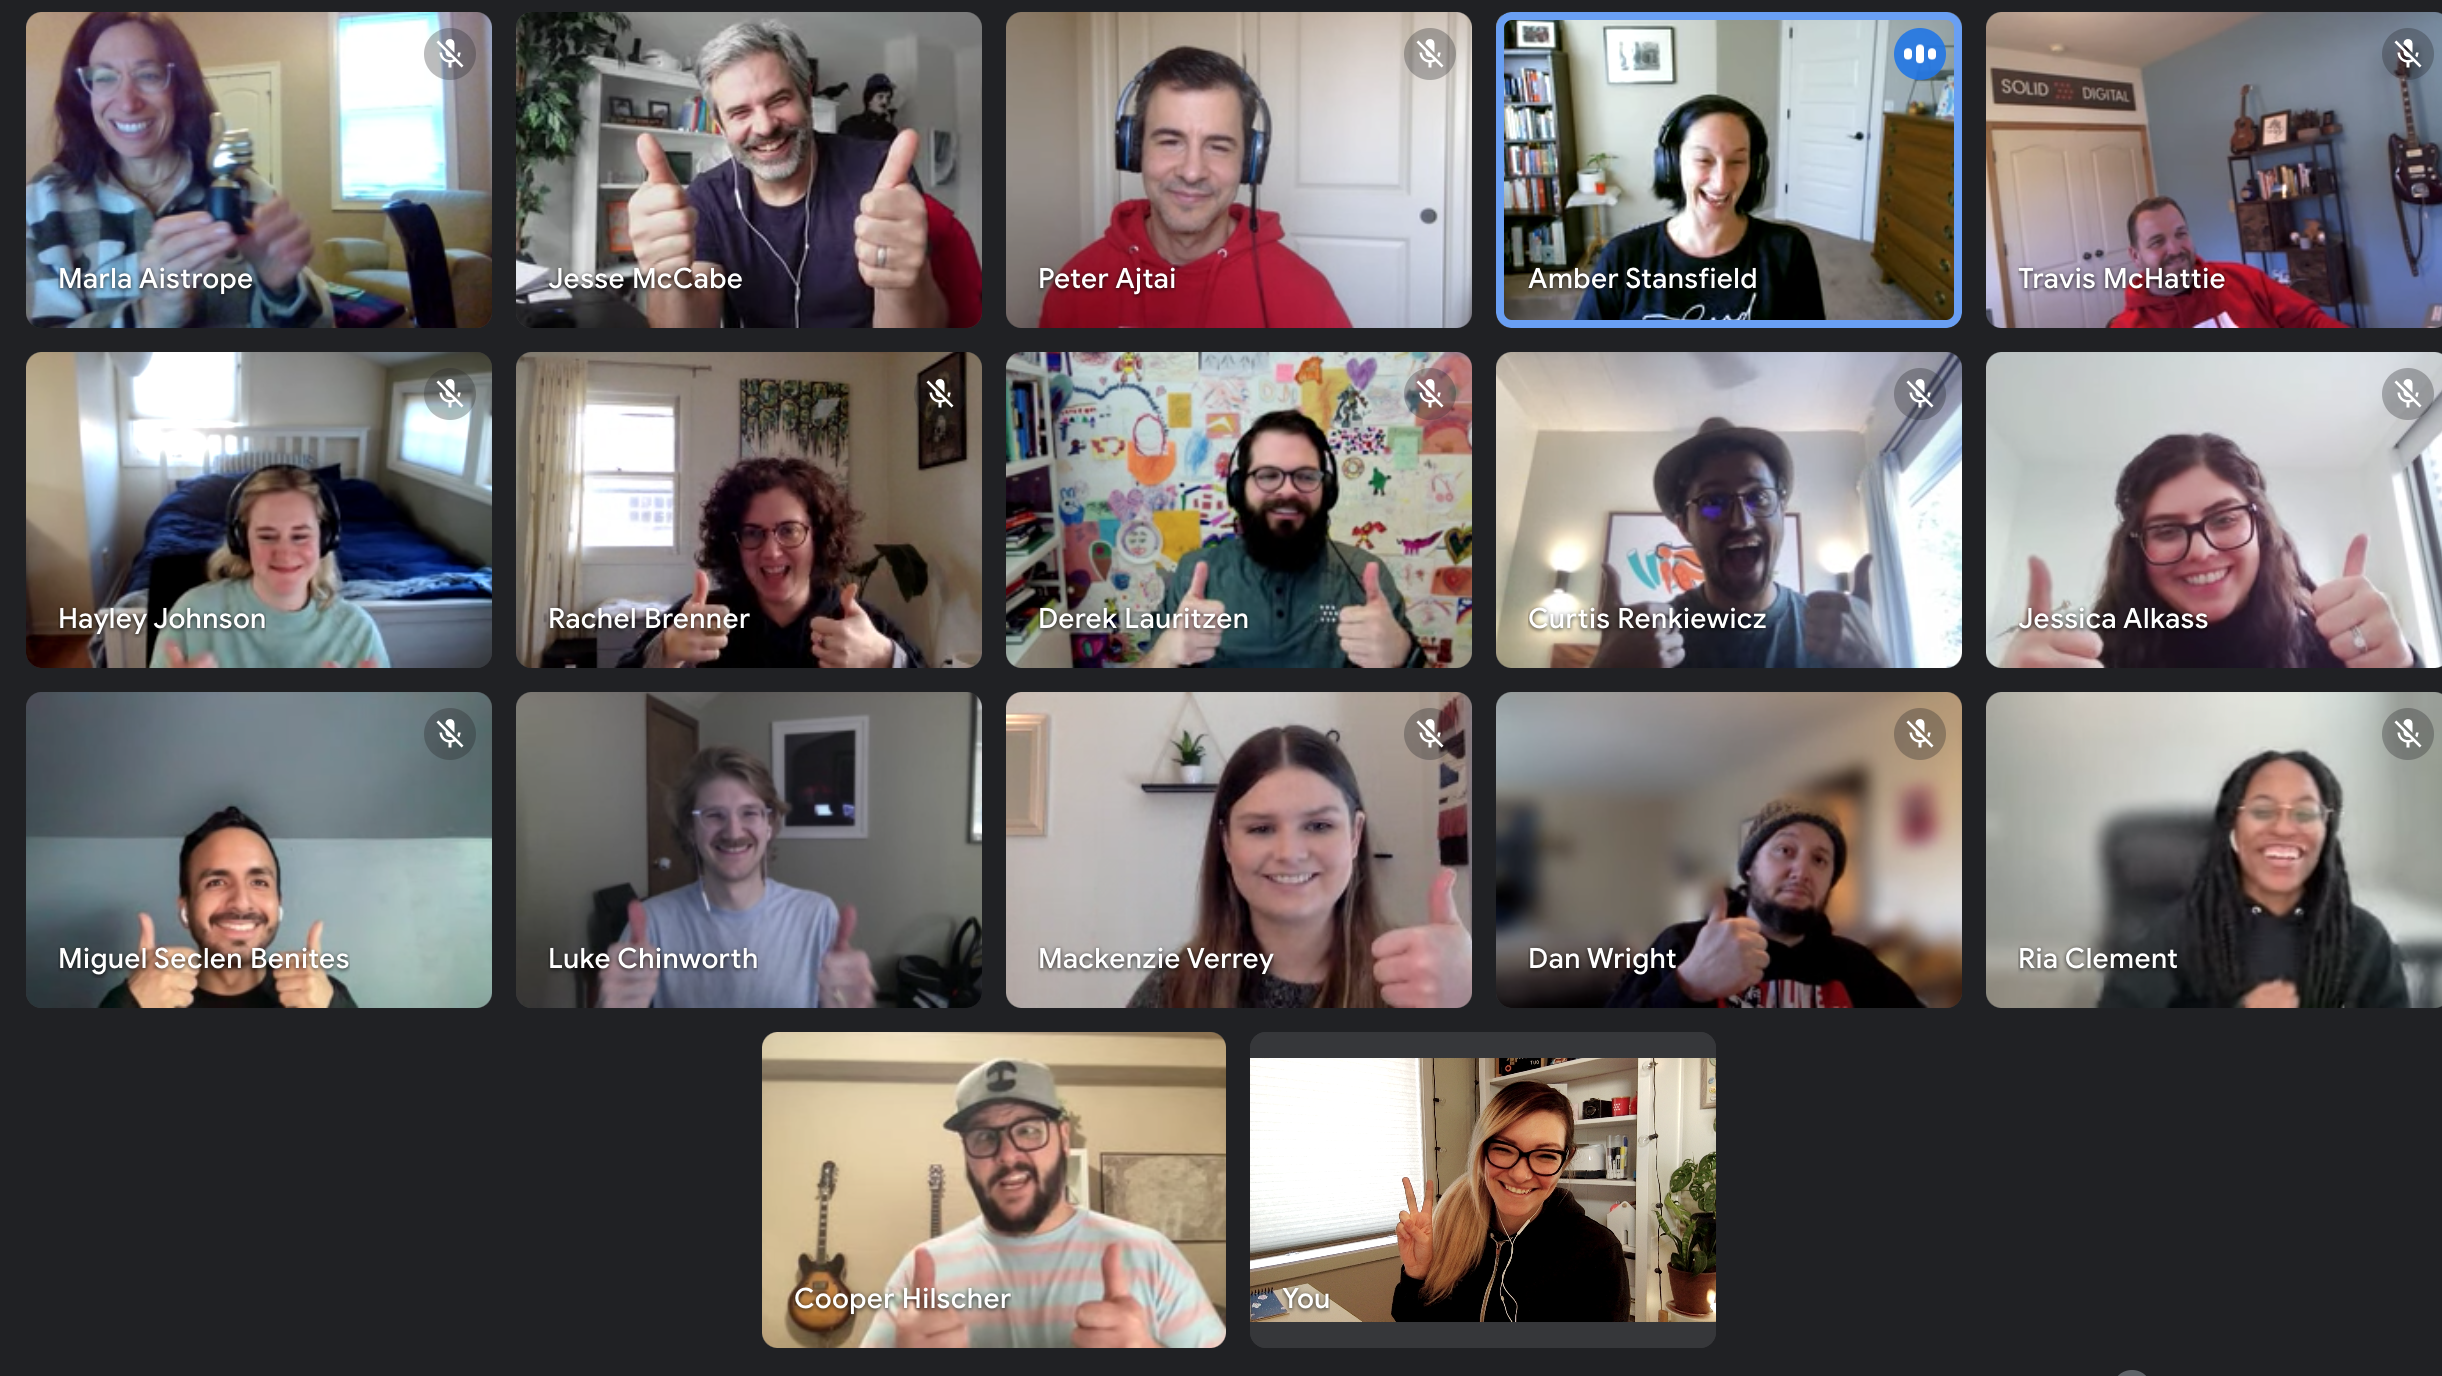 A Screen capture of a Zoom Call where the Solid Digital team is posing for a photo